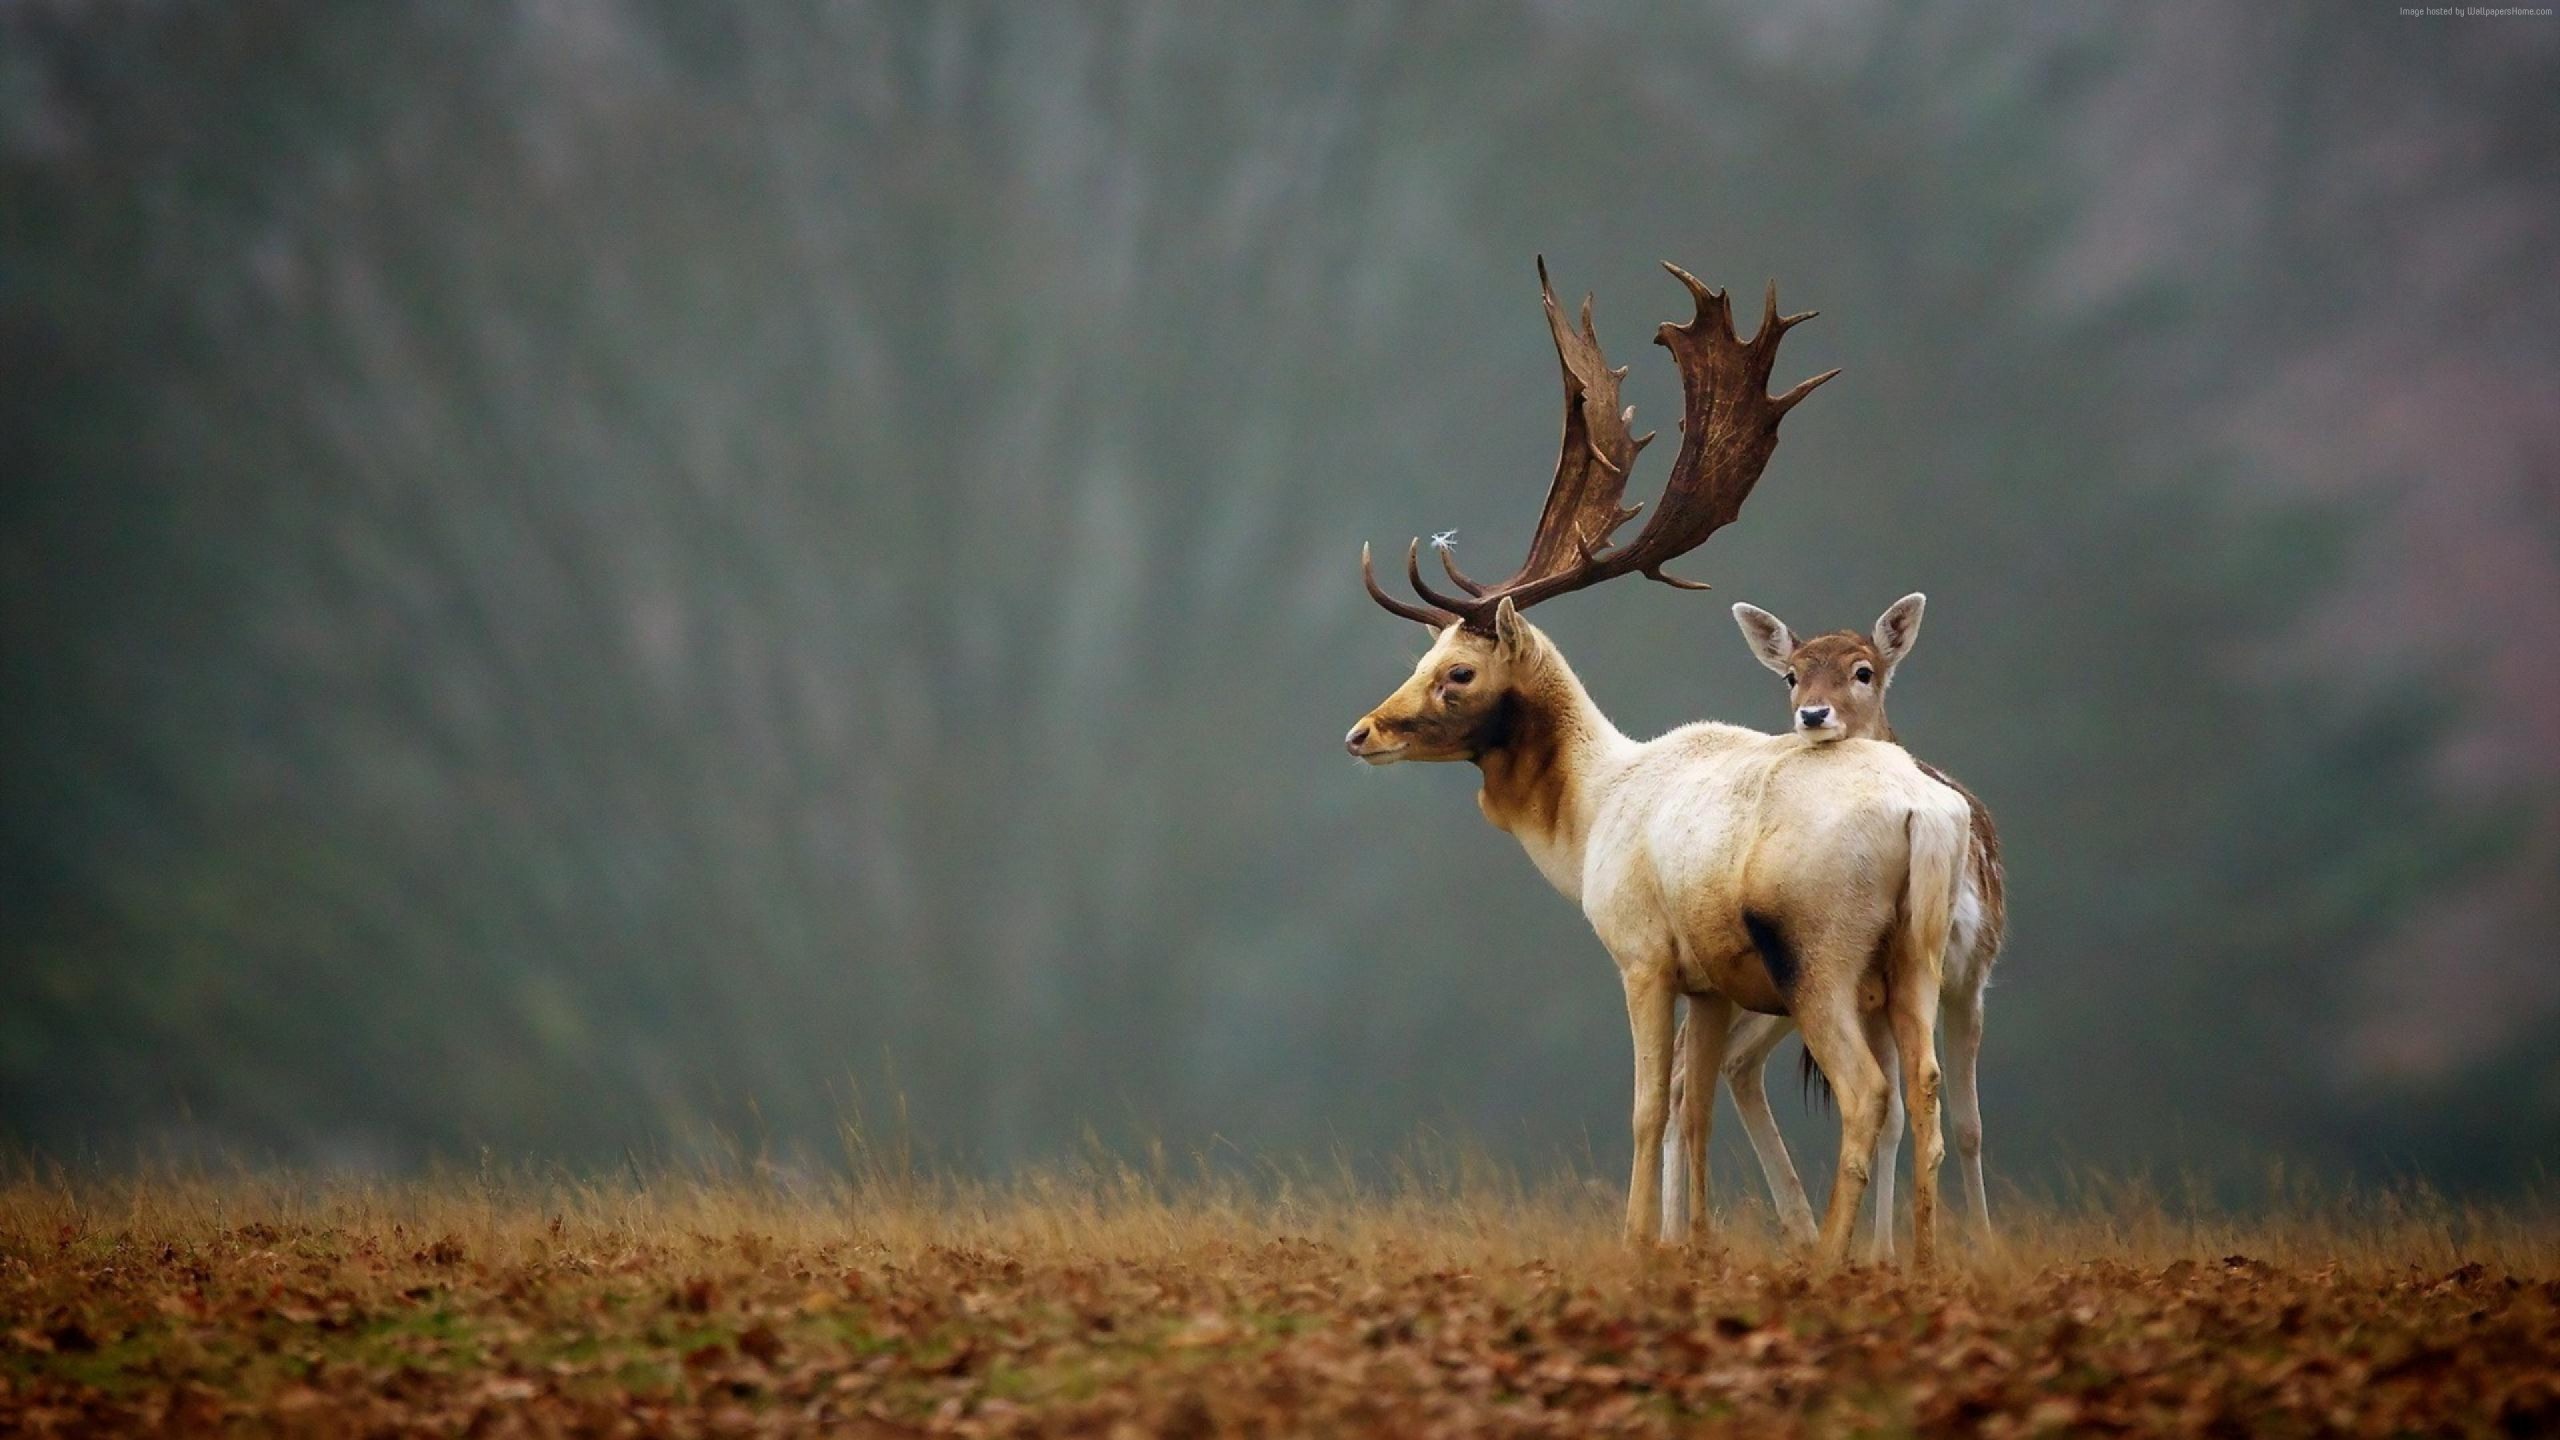 White and Brown Deer on Brown Grass Field. Wallpaper in 2560x1440 Resolution